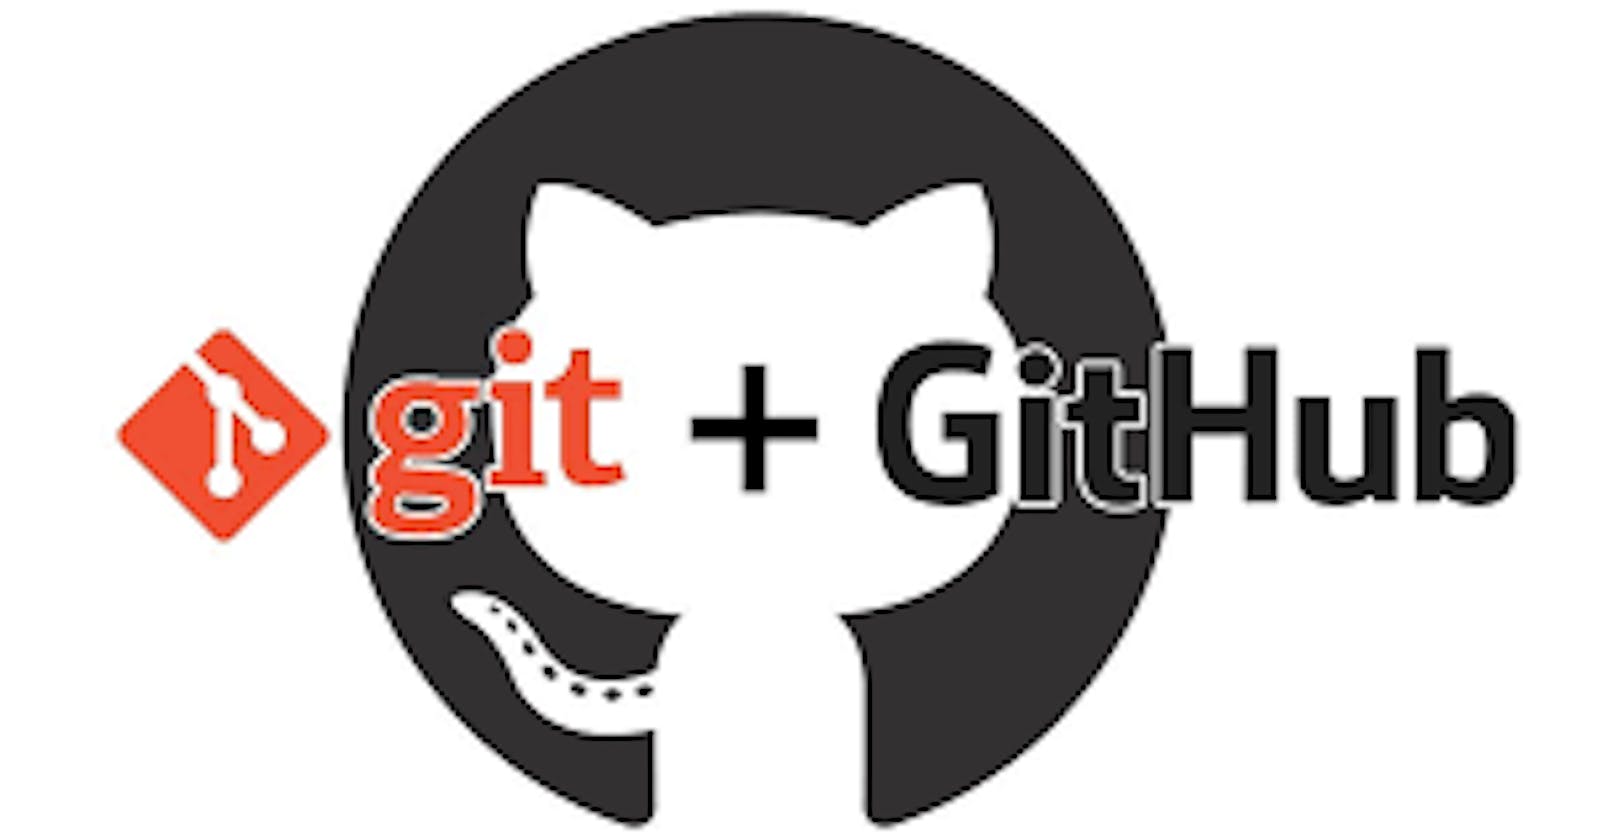 Git and GitHub: why should I get init?